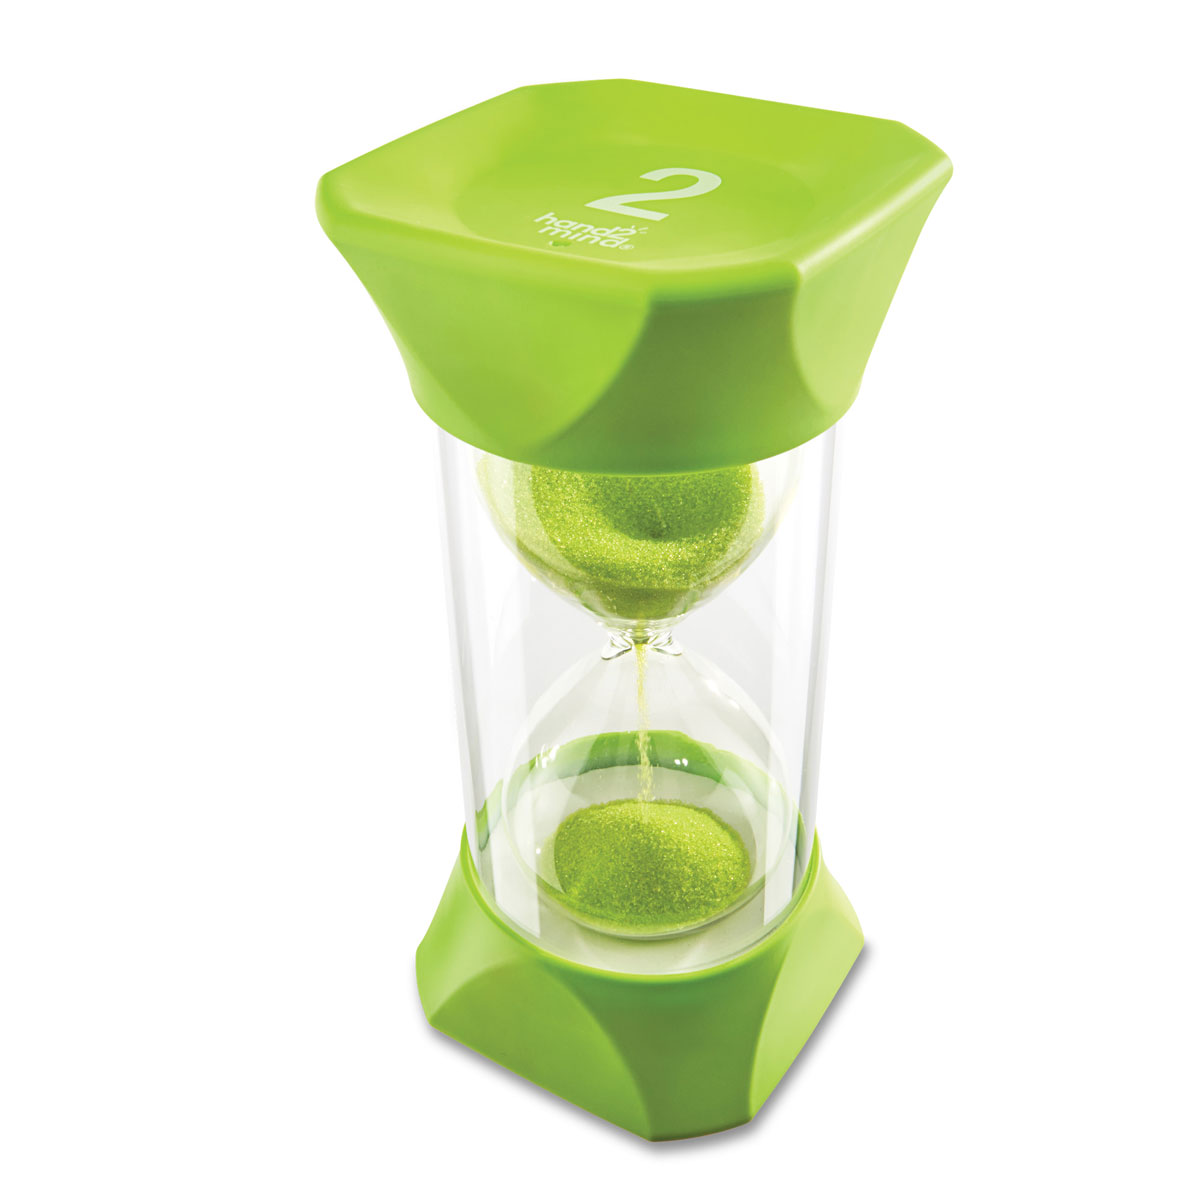 Classroom Sand Timers for Kids Set of 1 hand2mind Green Jumbo Sand Timers 2 Minute Sand Timer Hourglass Sand Timer with Soft Rubber End Caps Offers Quiet Pausing Teeth Brushing and Game Timer 